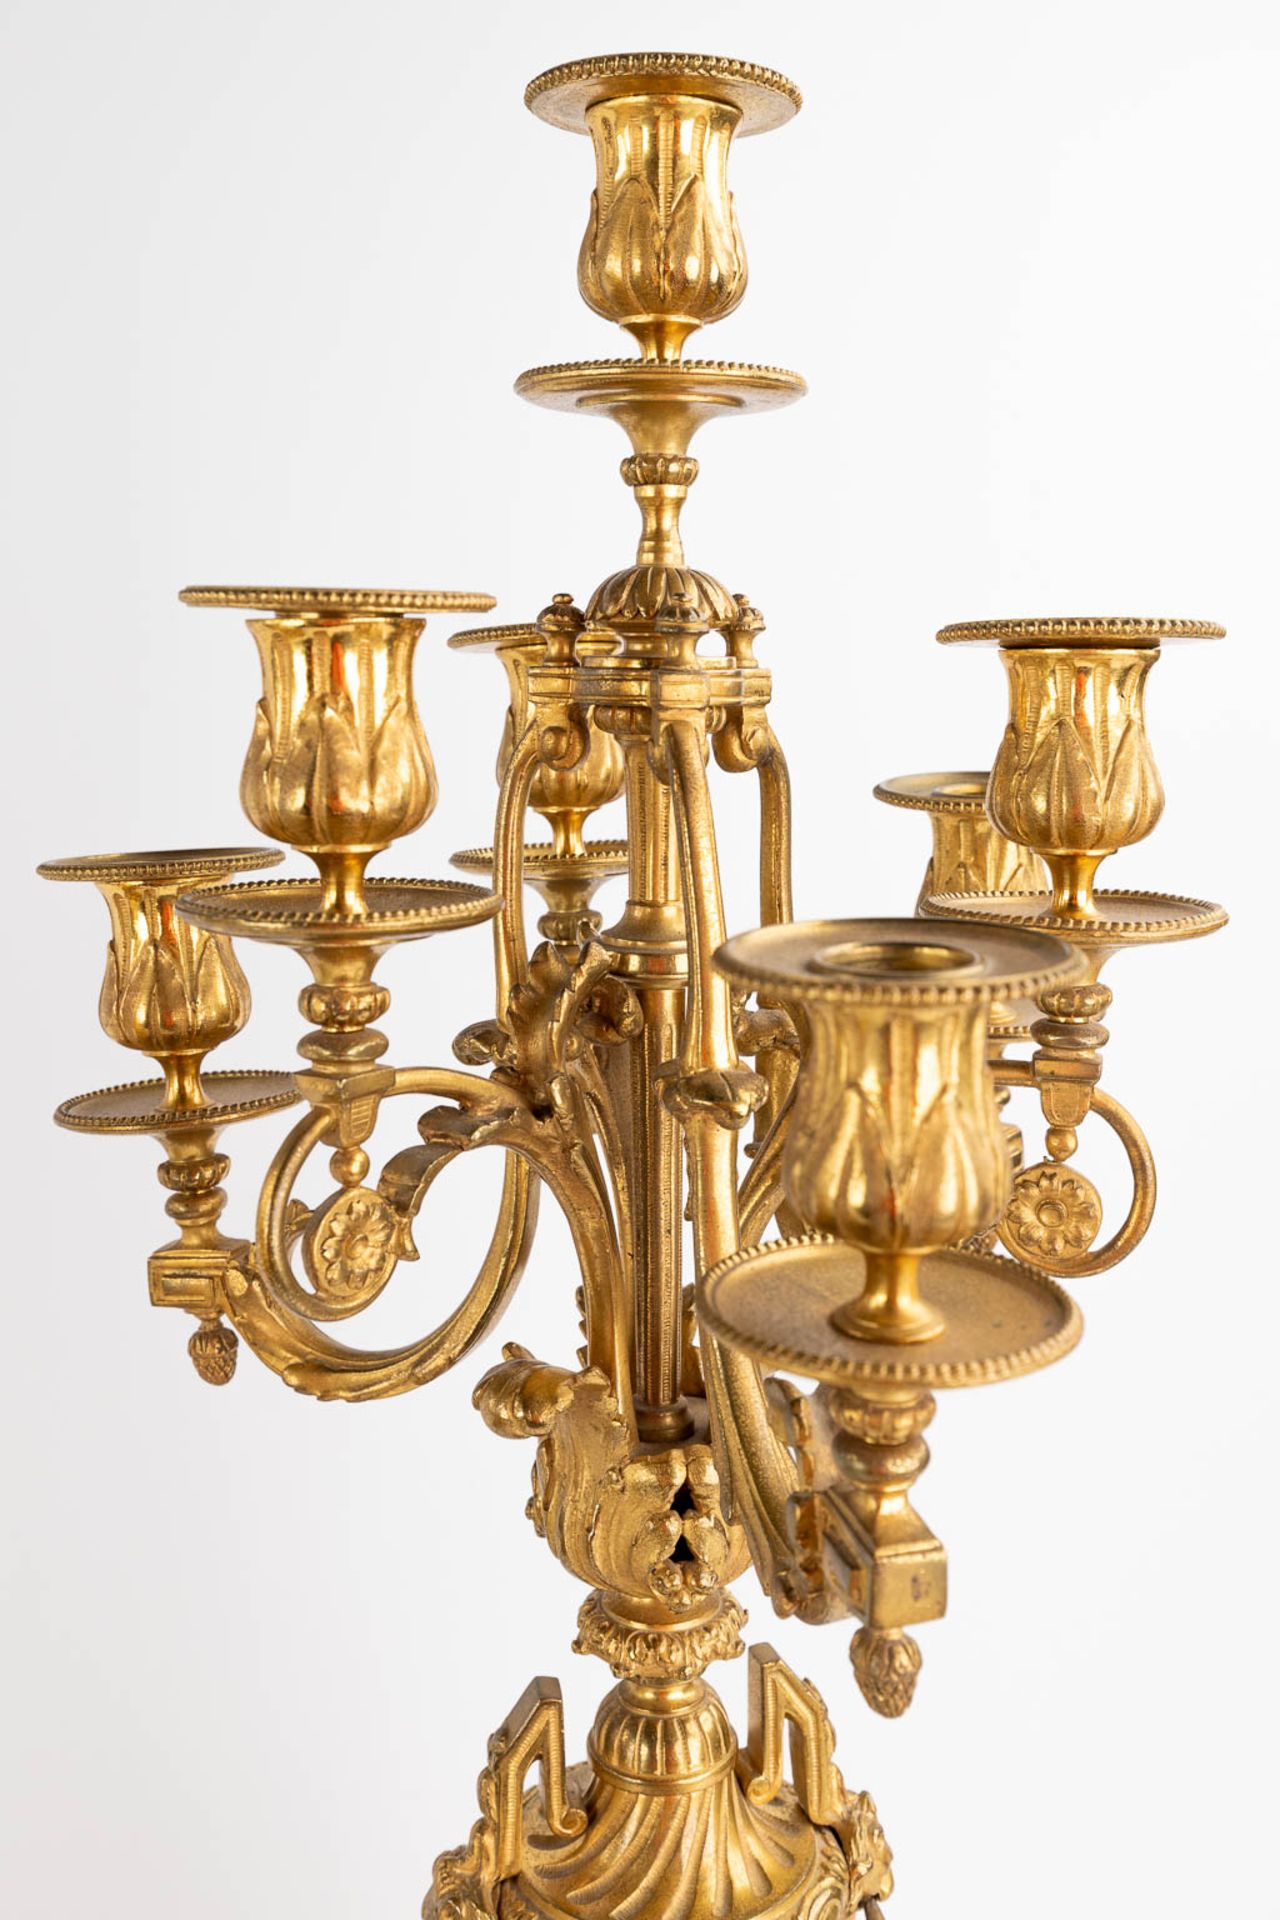 A three-piece mantle garniture clock and candelabra, gilt bronze in a Louis XVI style, 19th C. (D:19 - Image 9 of 19